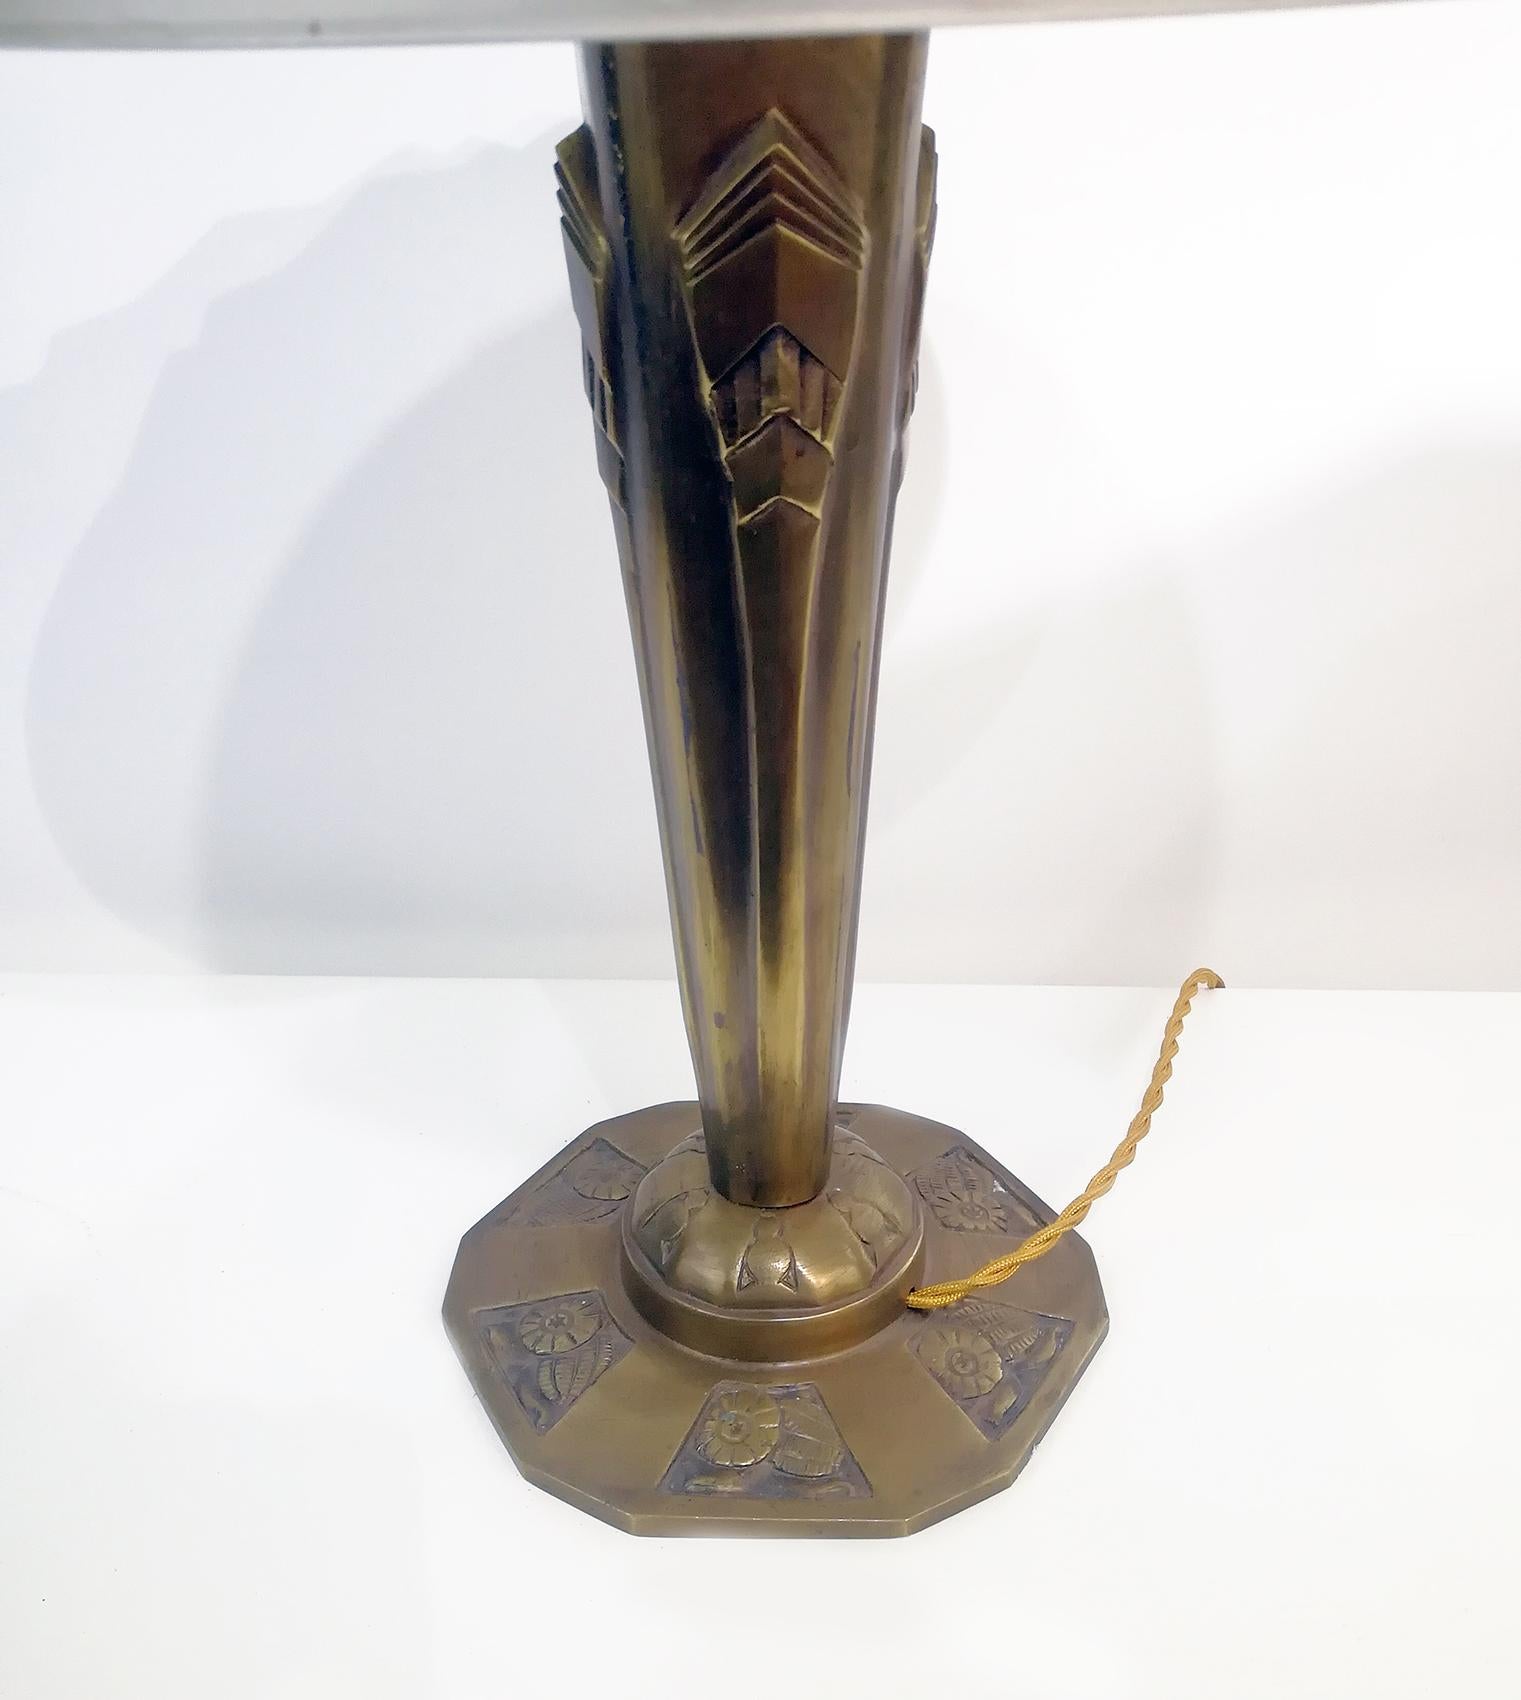 Pair of French Art Deco Table Lamp Signed “Degué” For Sale 3